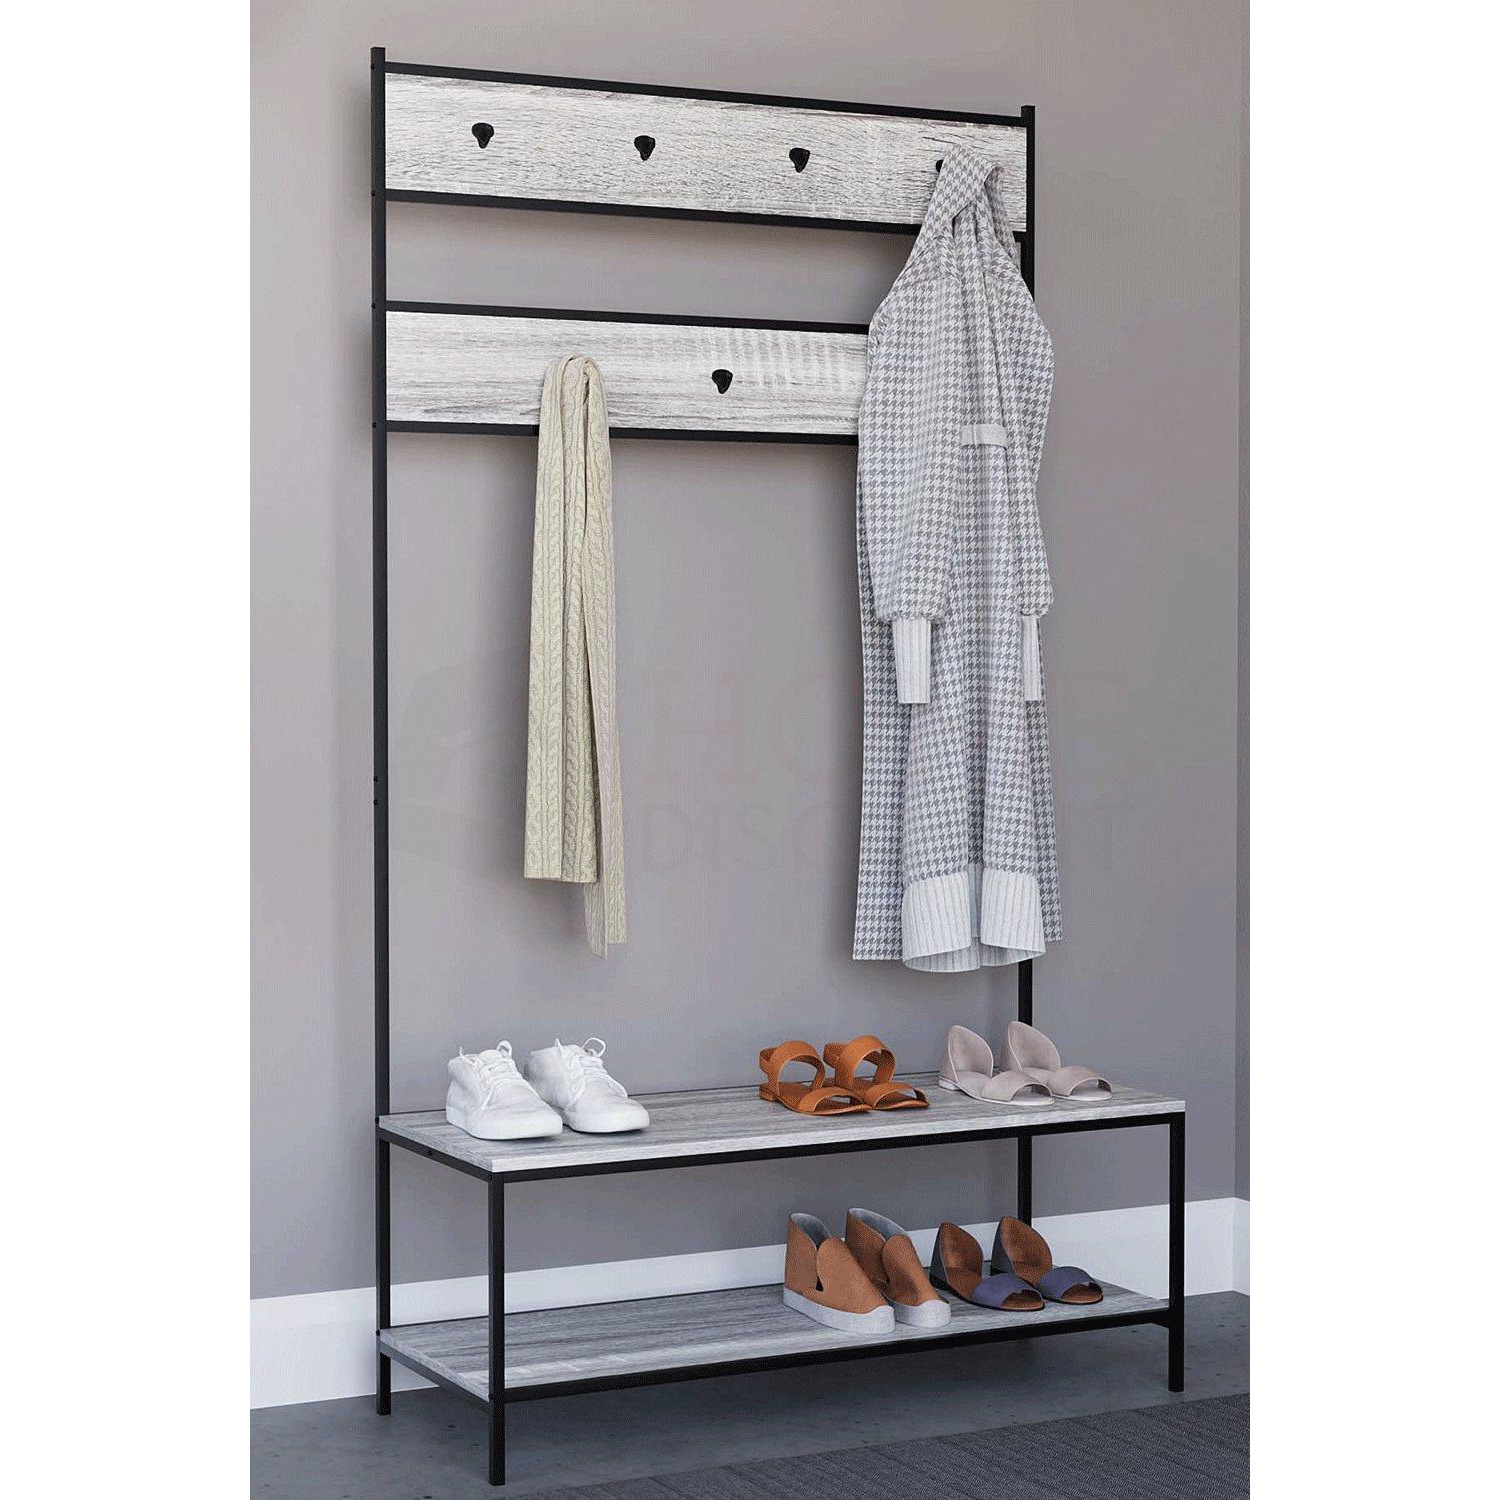 Vida Designs Brooklyn Hallway Unit Hanging Clothes Rack Stand with Storage Shelves - image 1